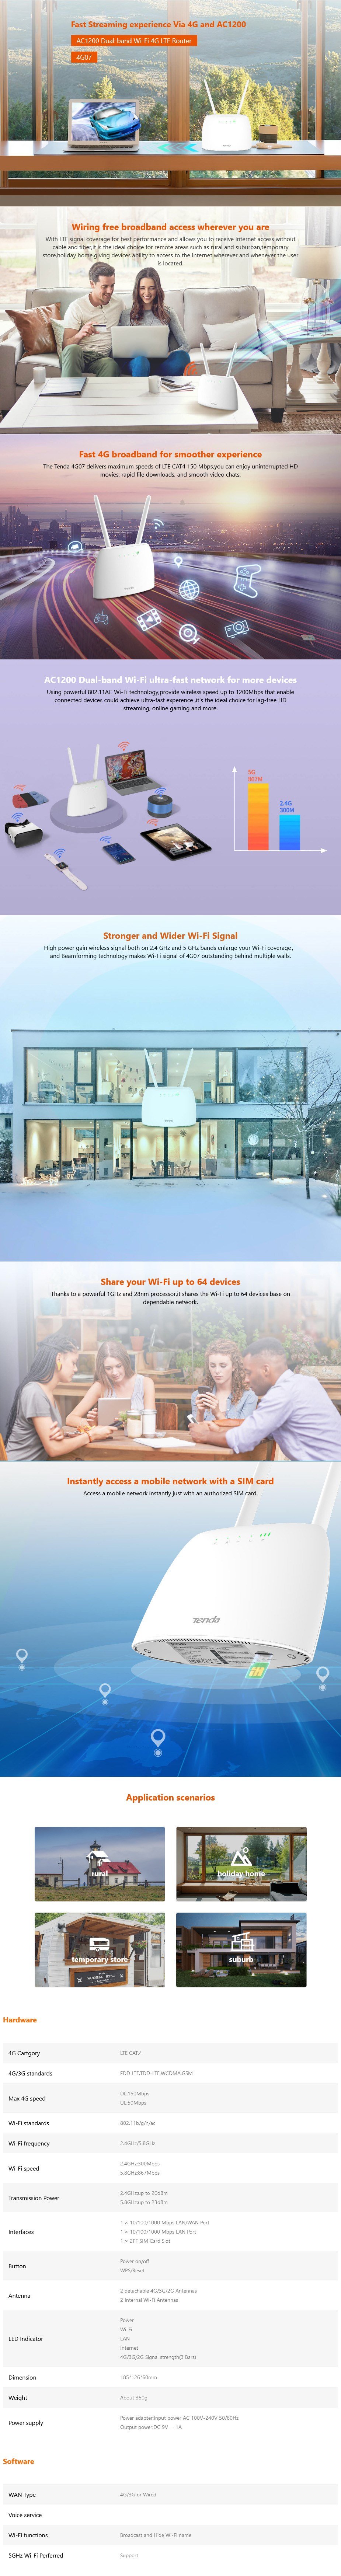 A large marketing image providing additional information about the product Tenda 4G07 AC1200 Dual-Band Wi-Fi 4G LTE Router - Additional alt info not provided